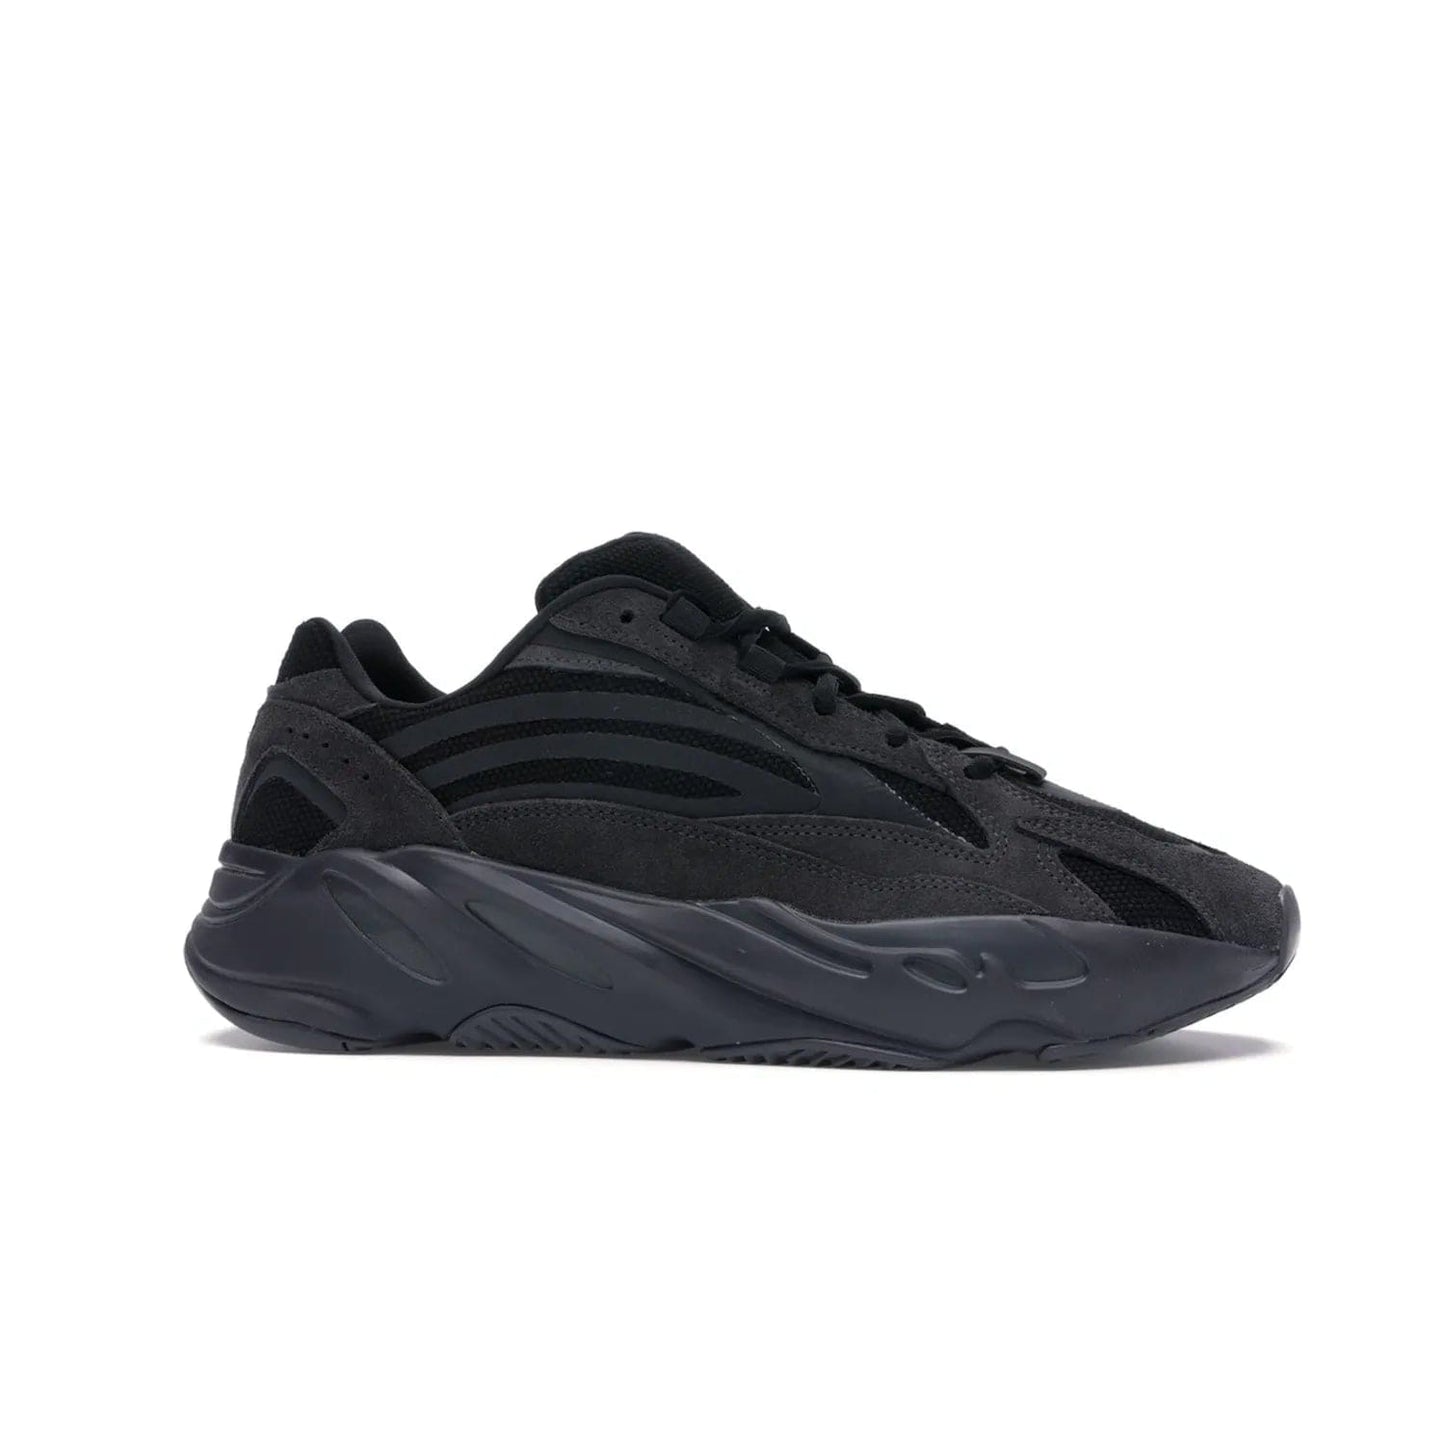 adidas Yeezy Boost 700 V2 Vanta - Image 2 - Only at www.BallersClubKickz.com - Introducing the adidas Yeezy Boost 700 V2 Vanta - a sleek and stylish all-black design featuring a combination of mesh, leather, and suede construction with signature Boost cushioning in the sole. The ultimate in comfort and support.